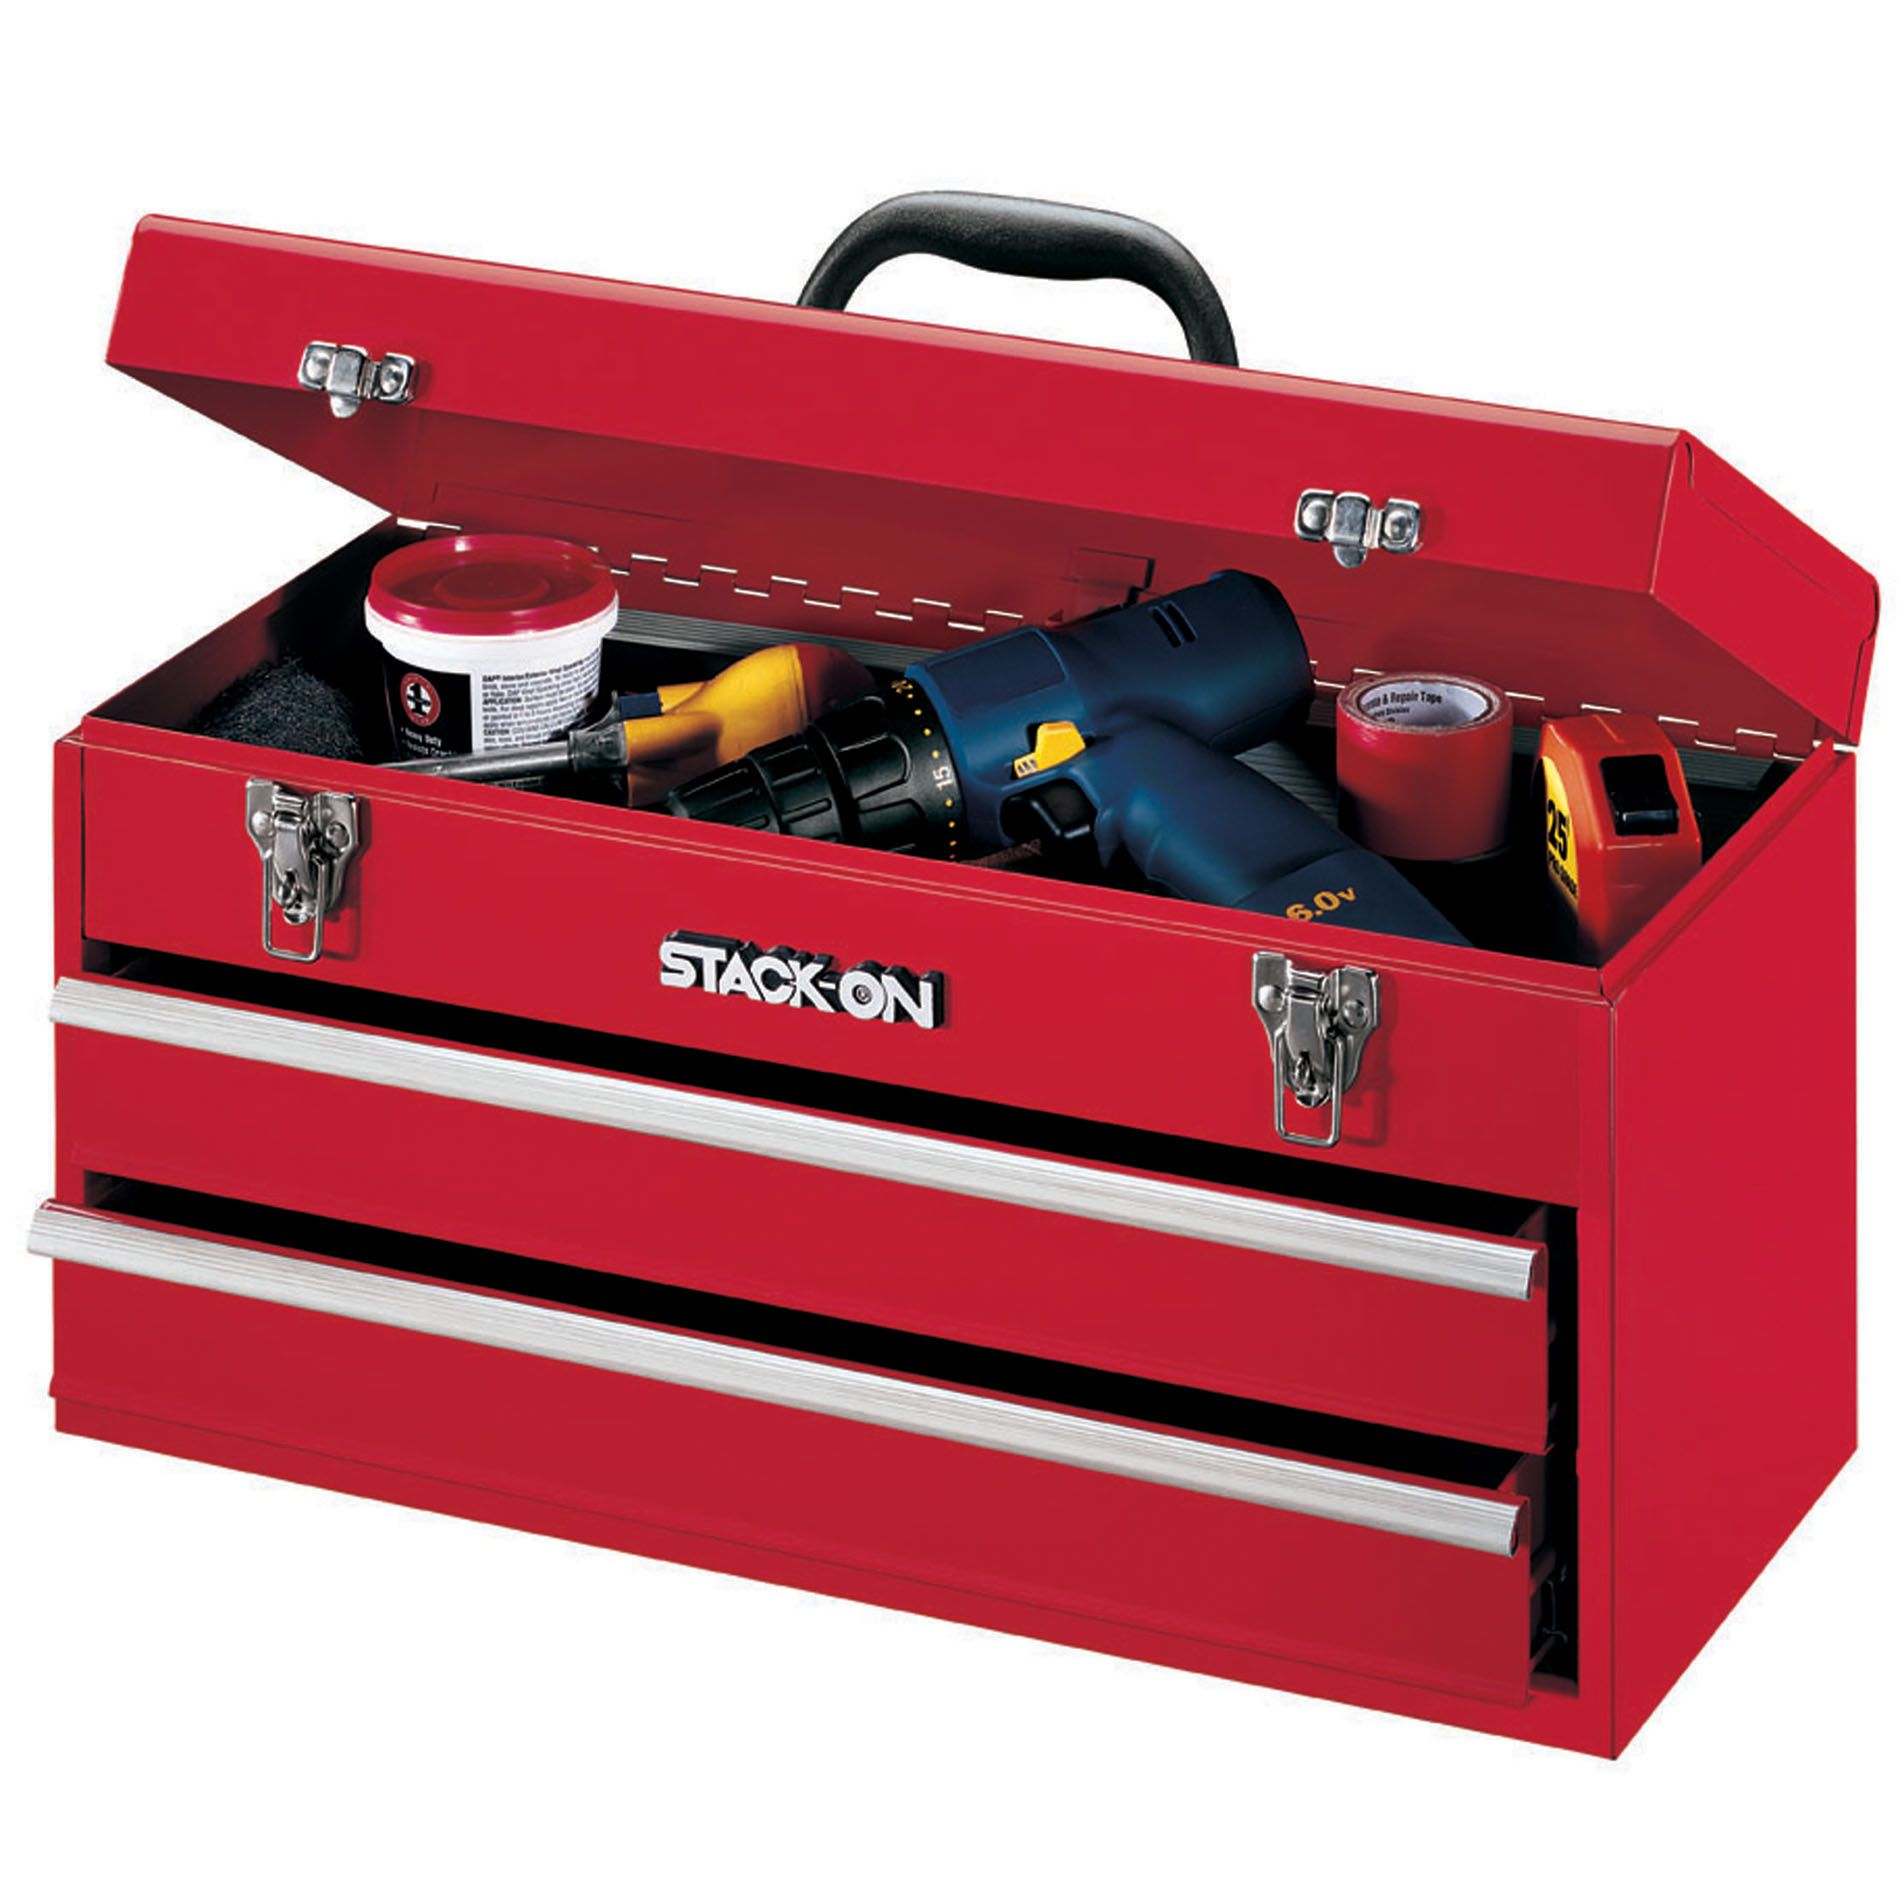 StackOn 20 in. 2Drawer All Steel Portable Tool Chest Red